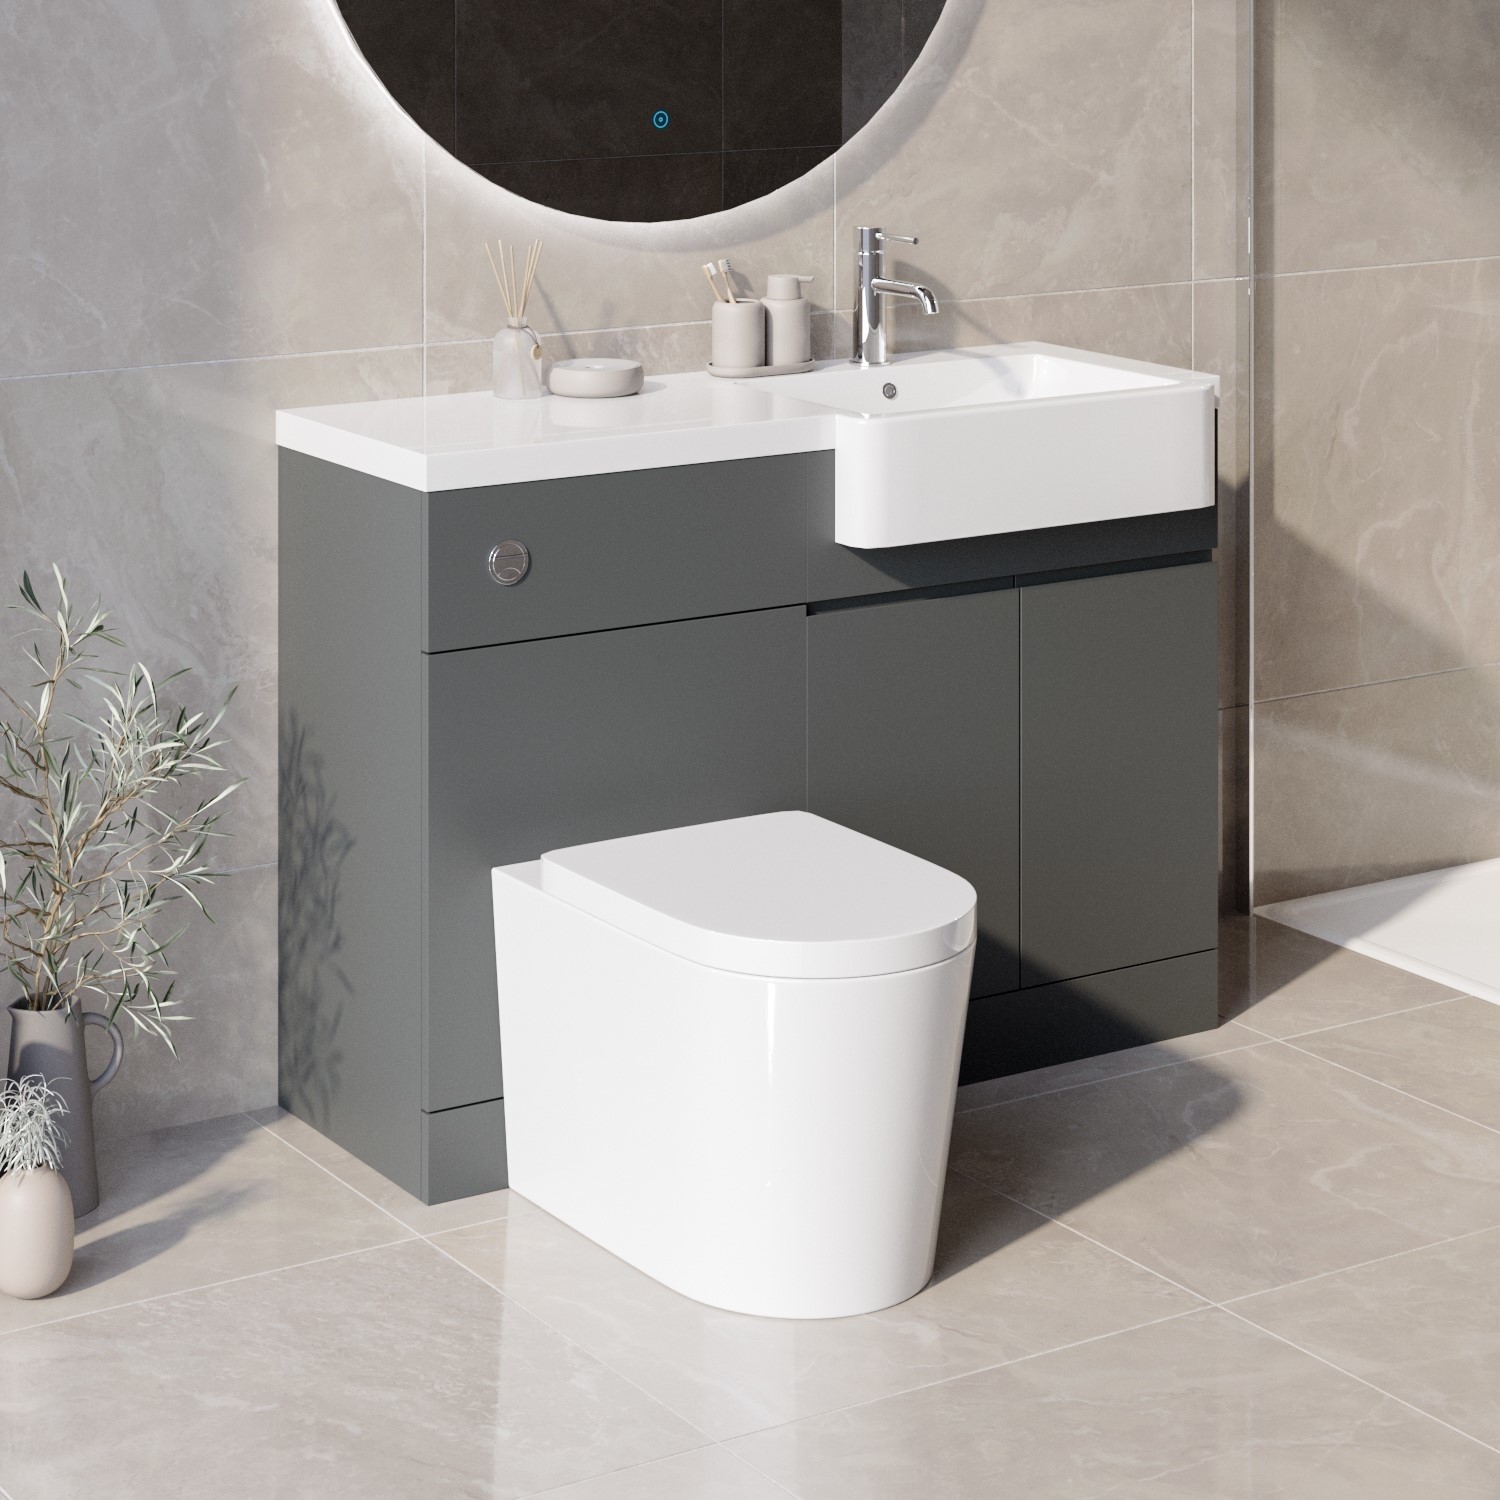 1100mm Grey Toilet And Sink Unit Right, Bathroom Vanity Units With Toilet